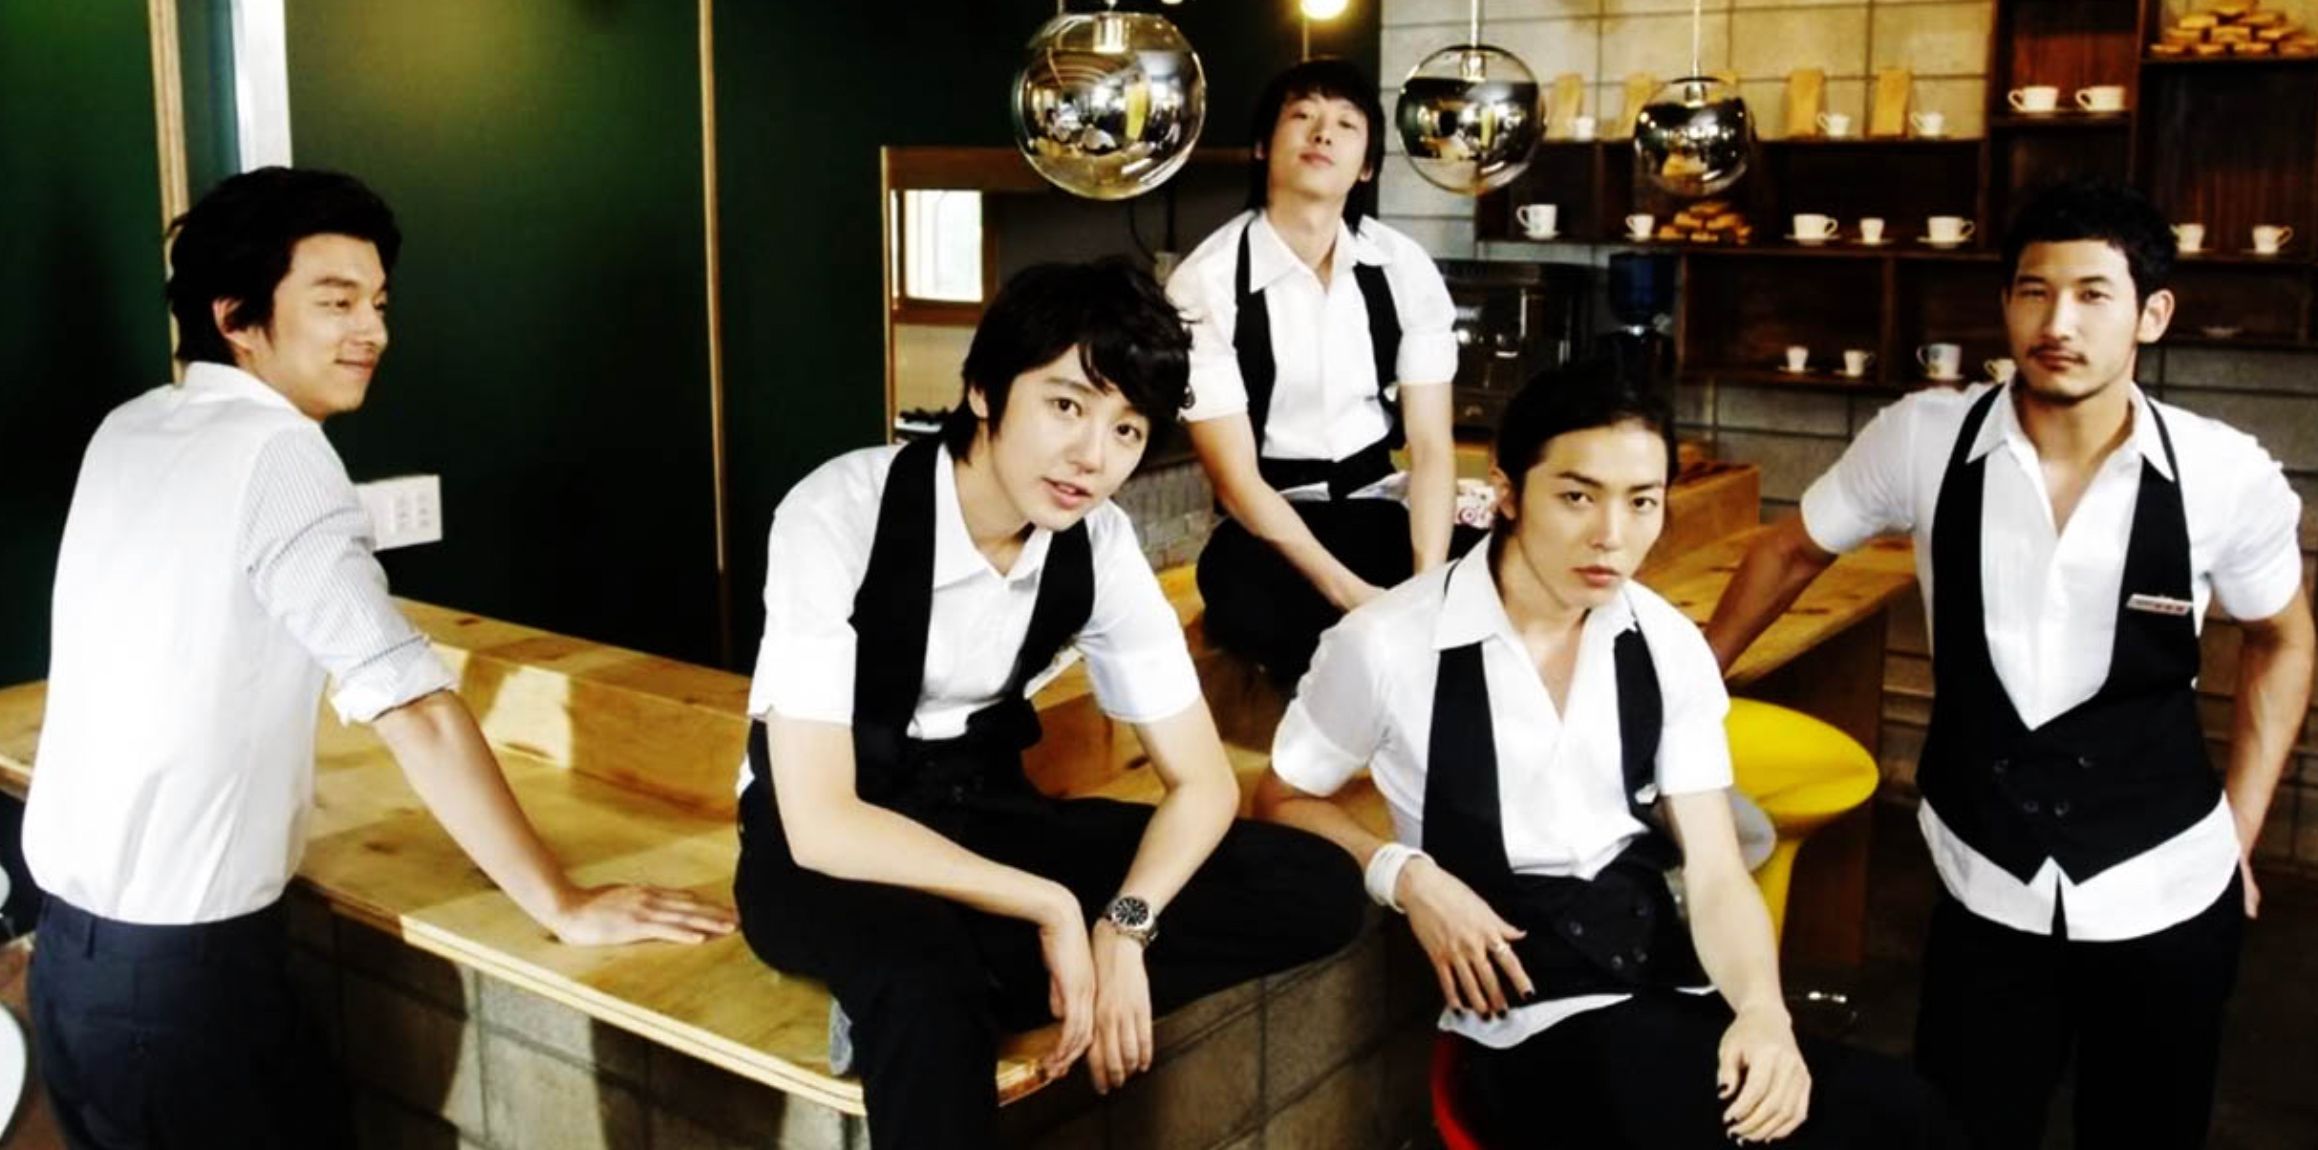 The cast of Coffee Prince in their uniforms in the cafe